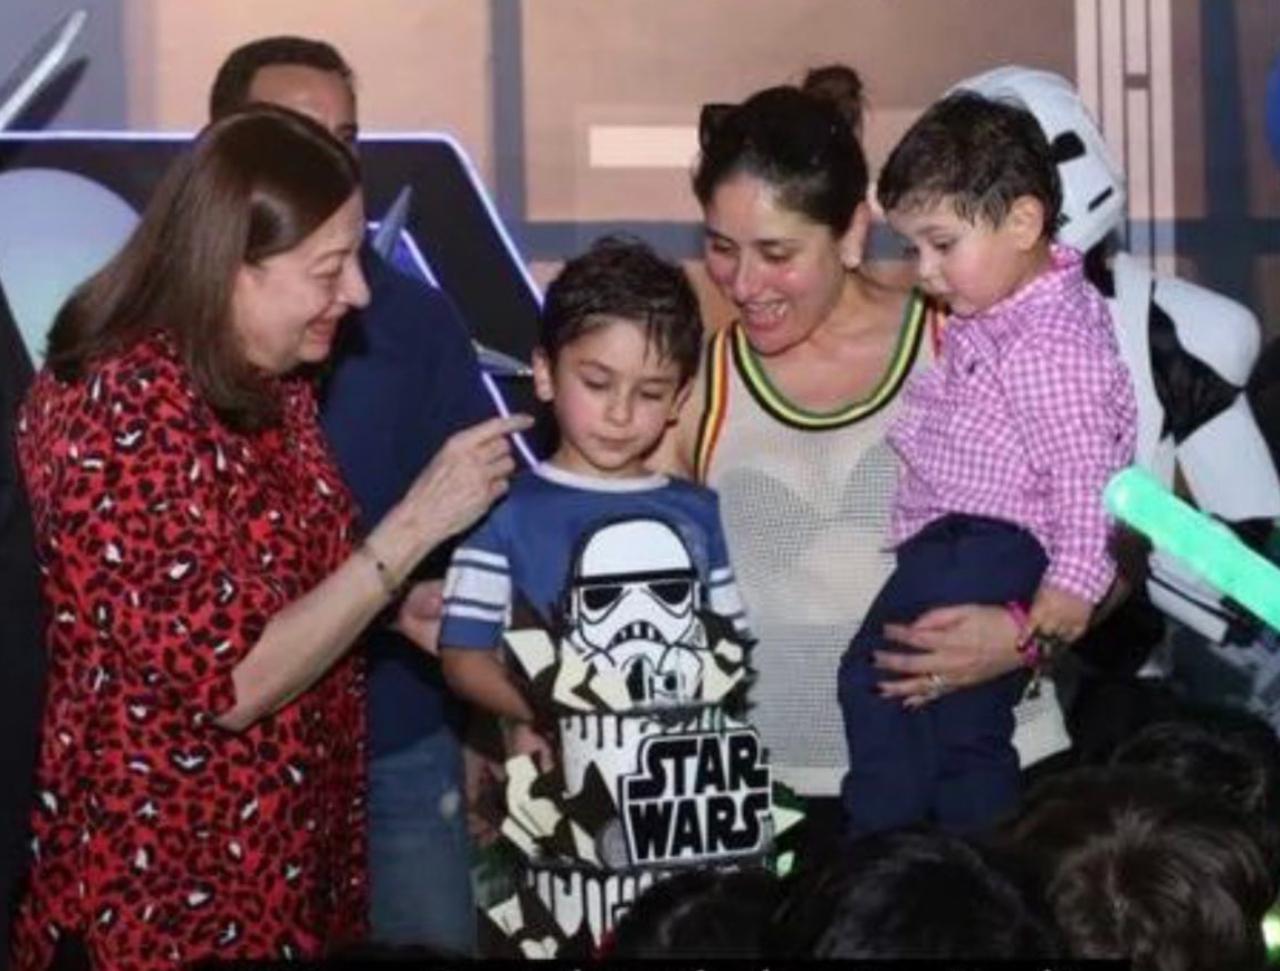 A sweaty Taimur cut his star wars cake along with mother Kareena and brother Jeh Ali Khan